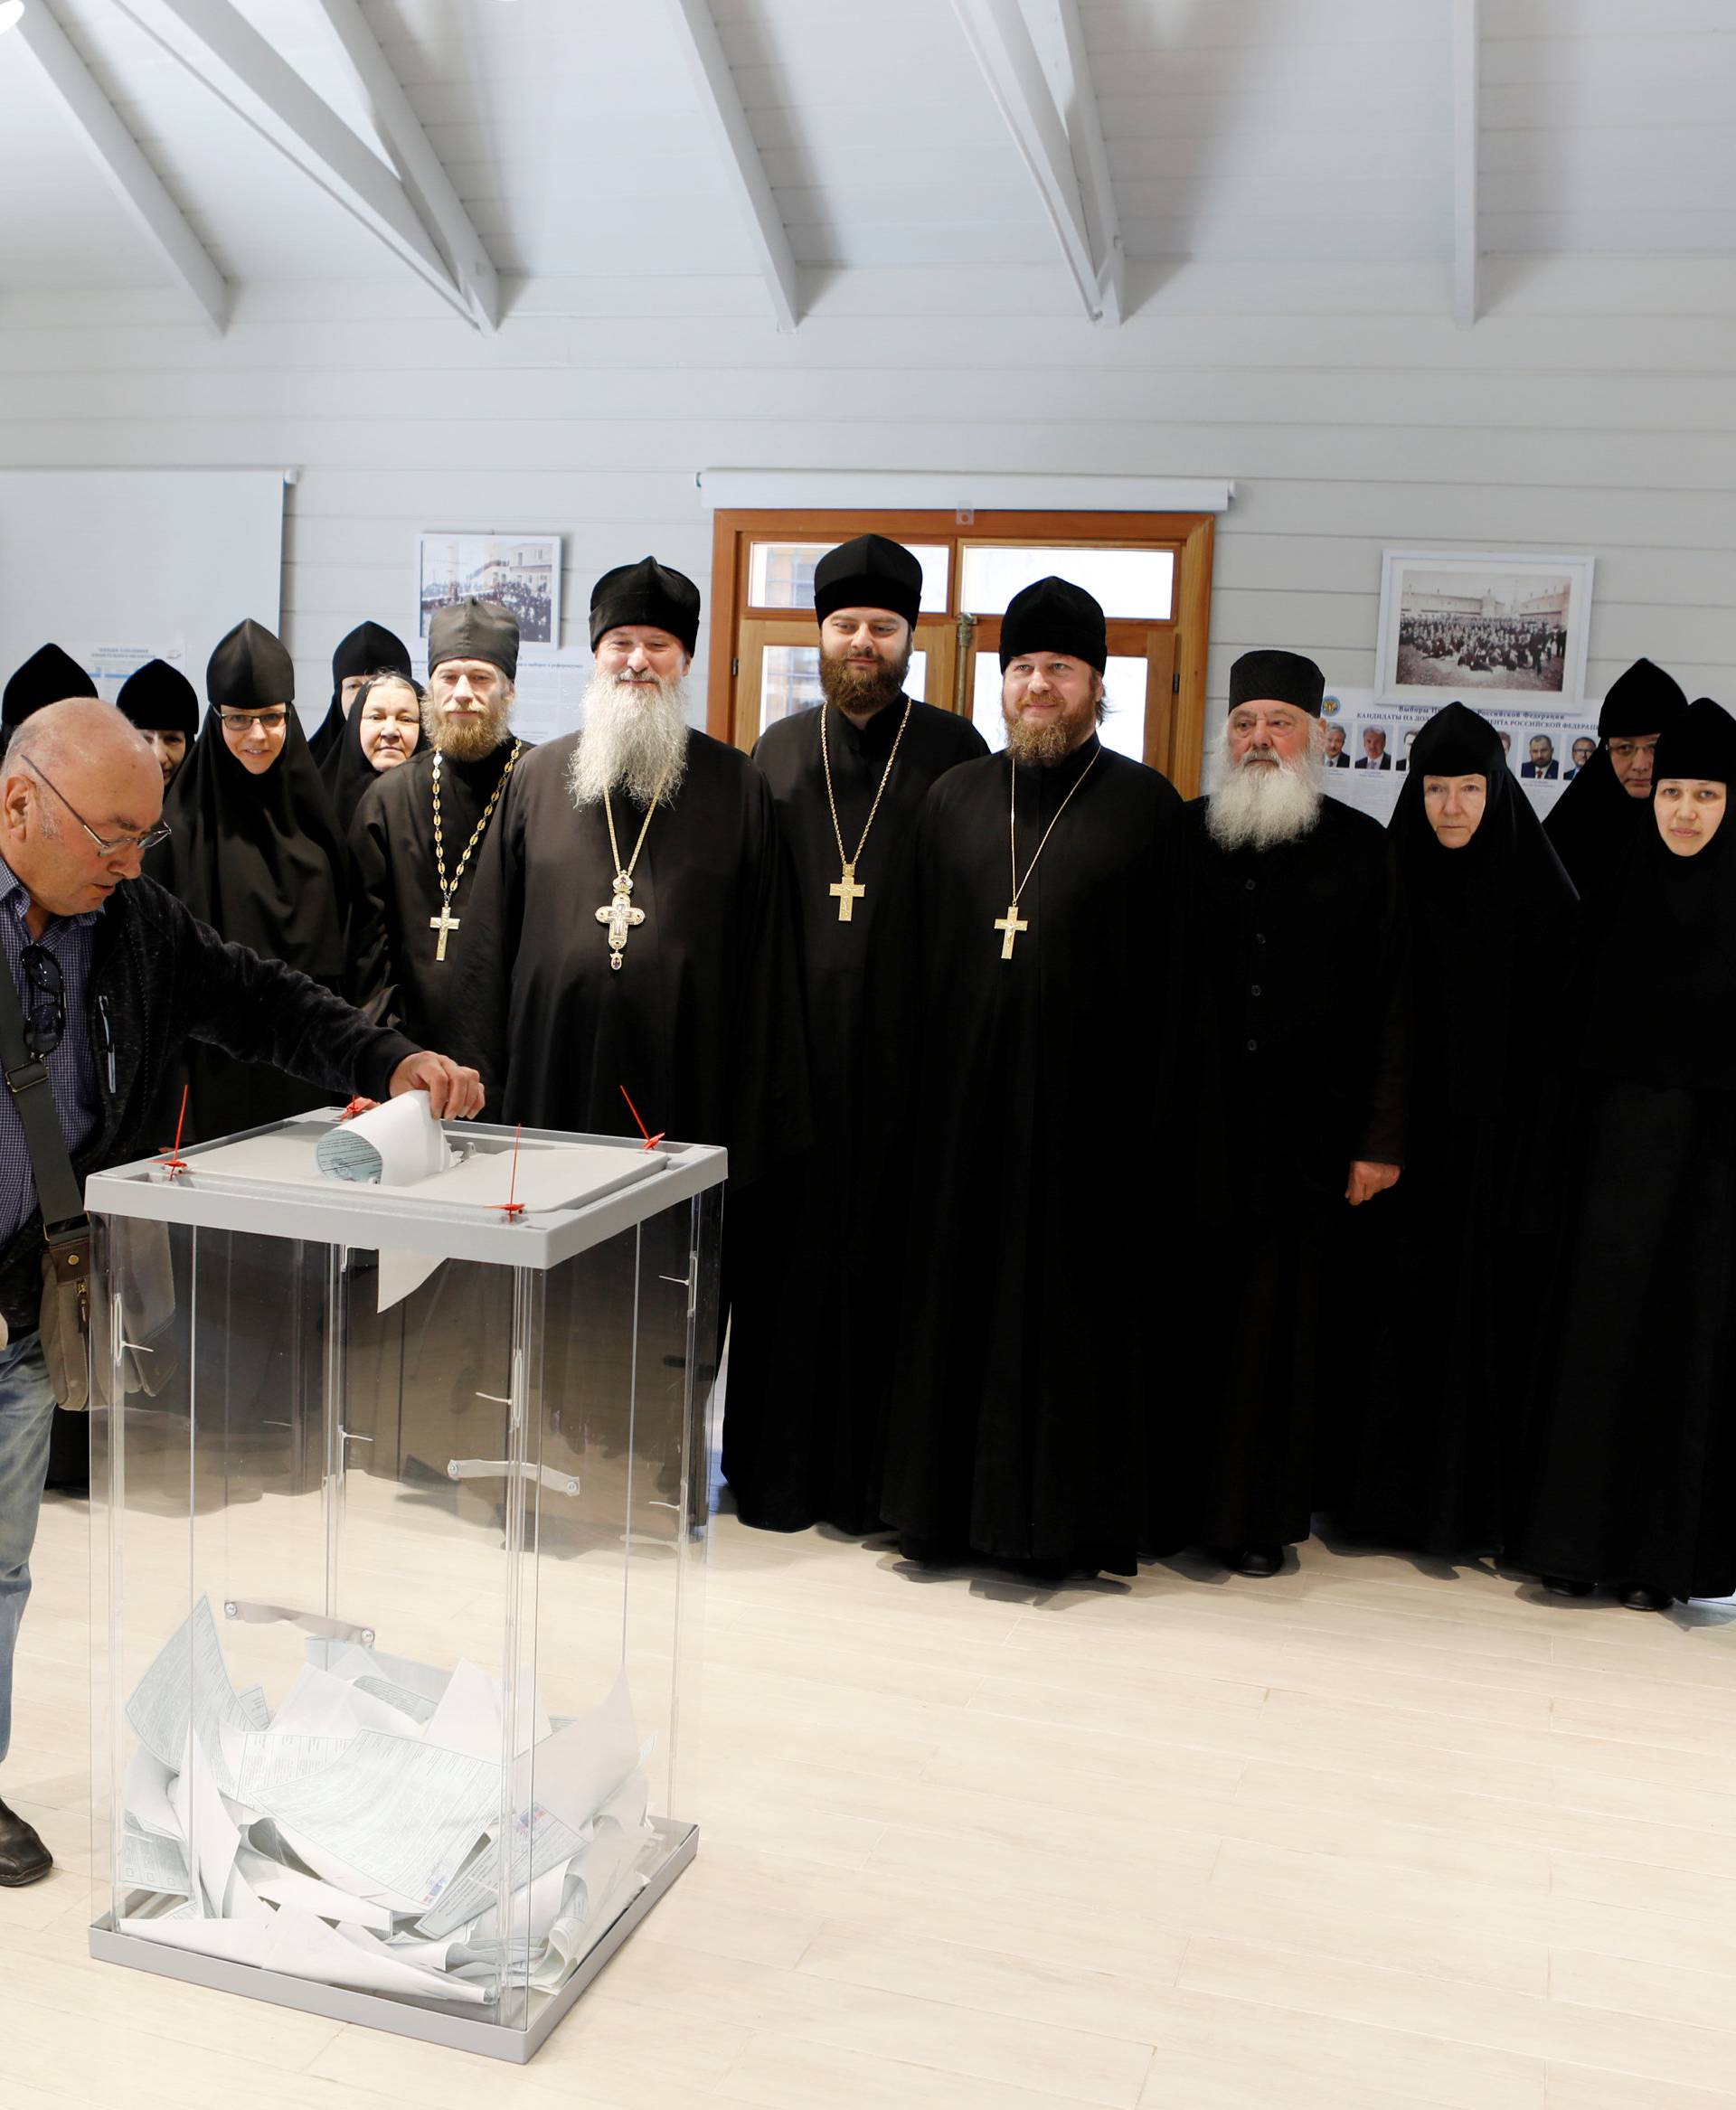 Russian clergymen and nuns pose for a group photo as a Russian citizen casts his ballot for Russia's presidential election in a polling station in Jerusalem